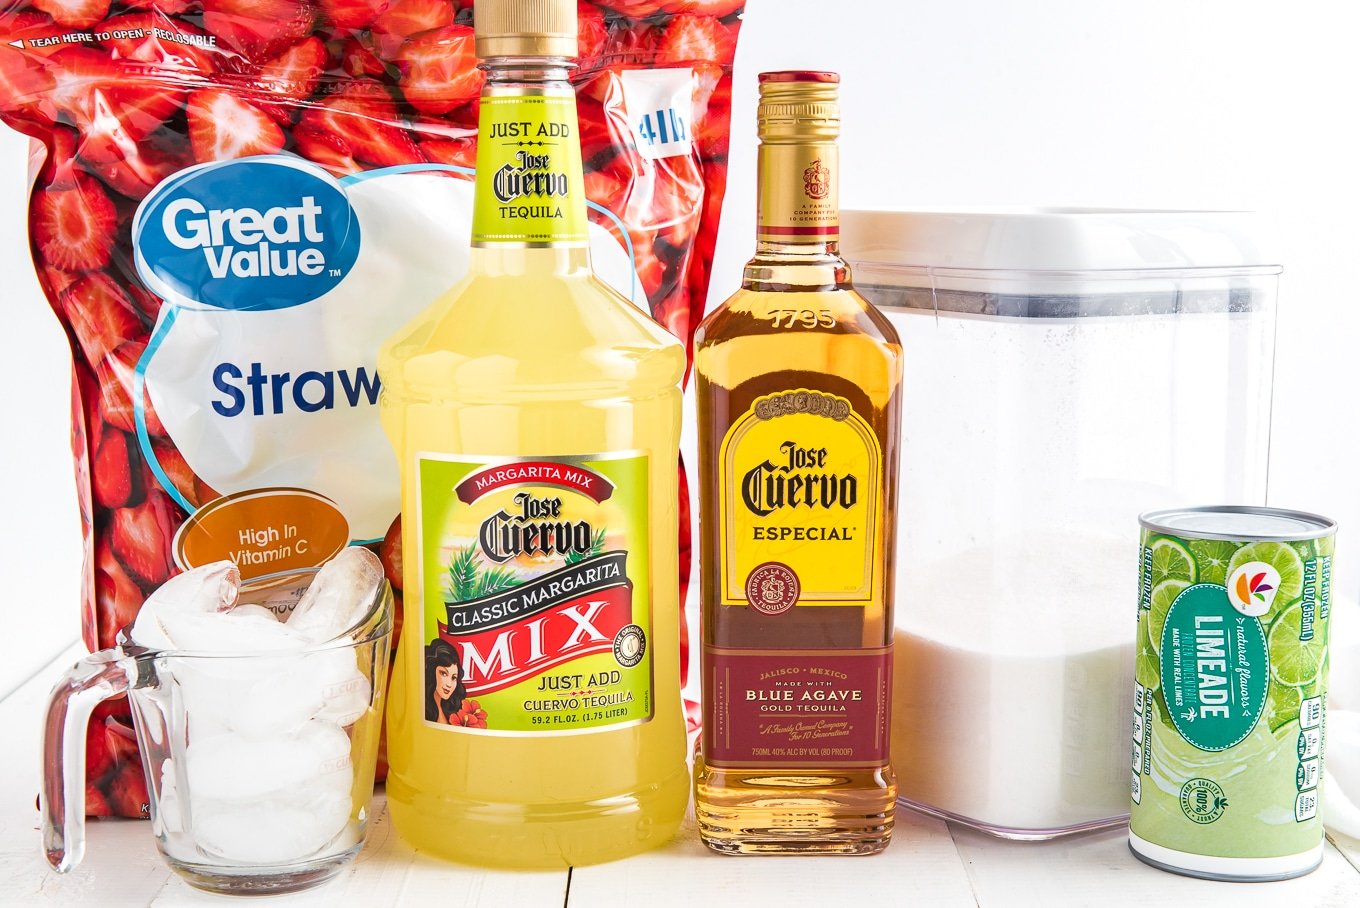 Ingredients to make frozen strawberry margaritas on the table.